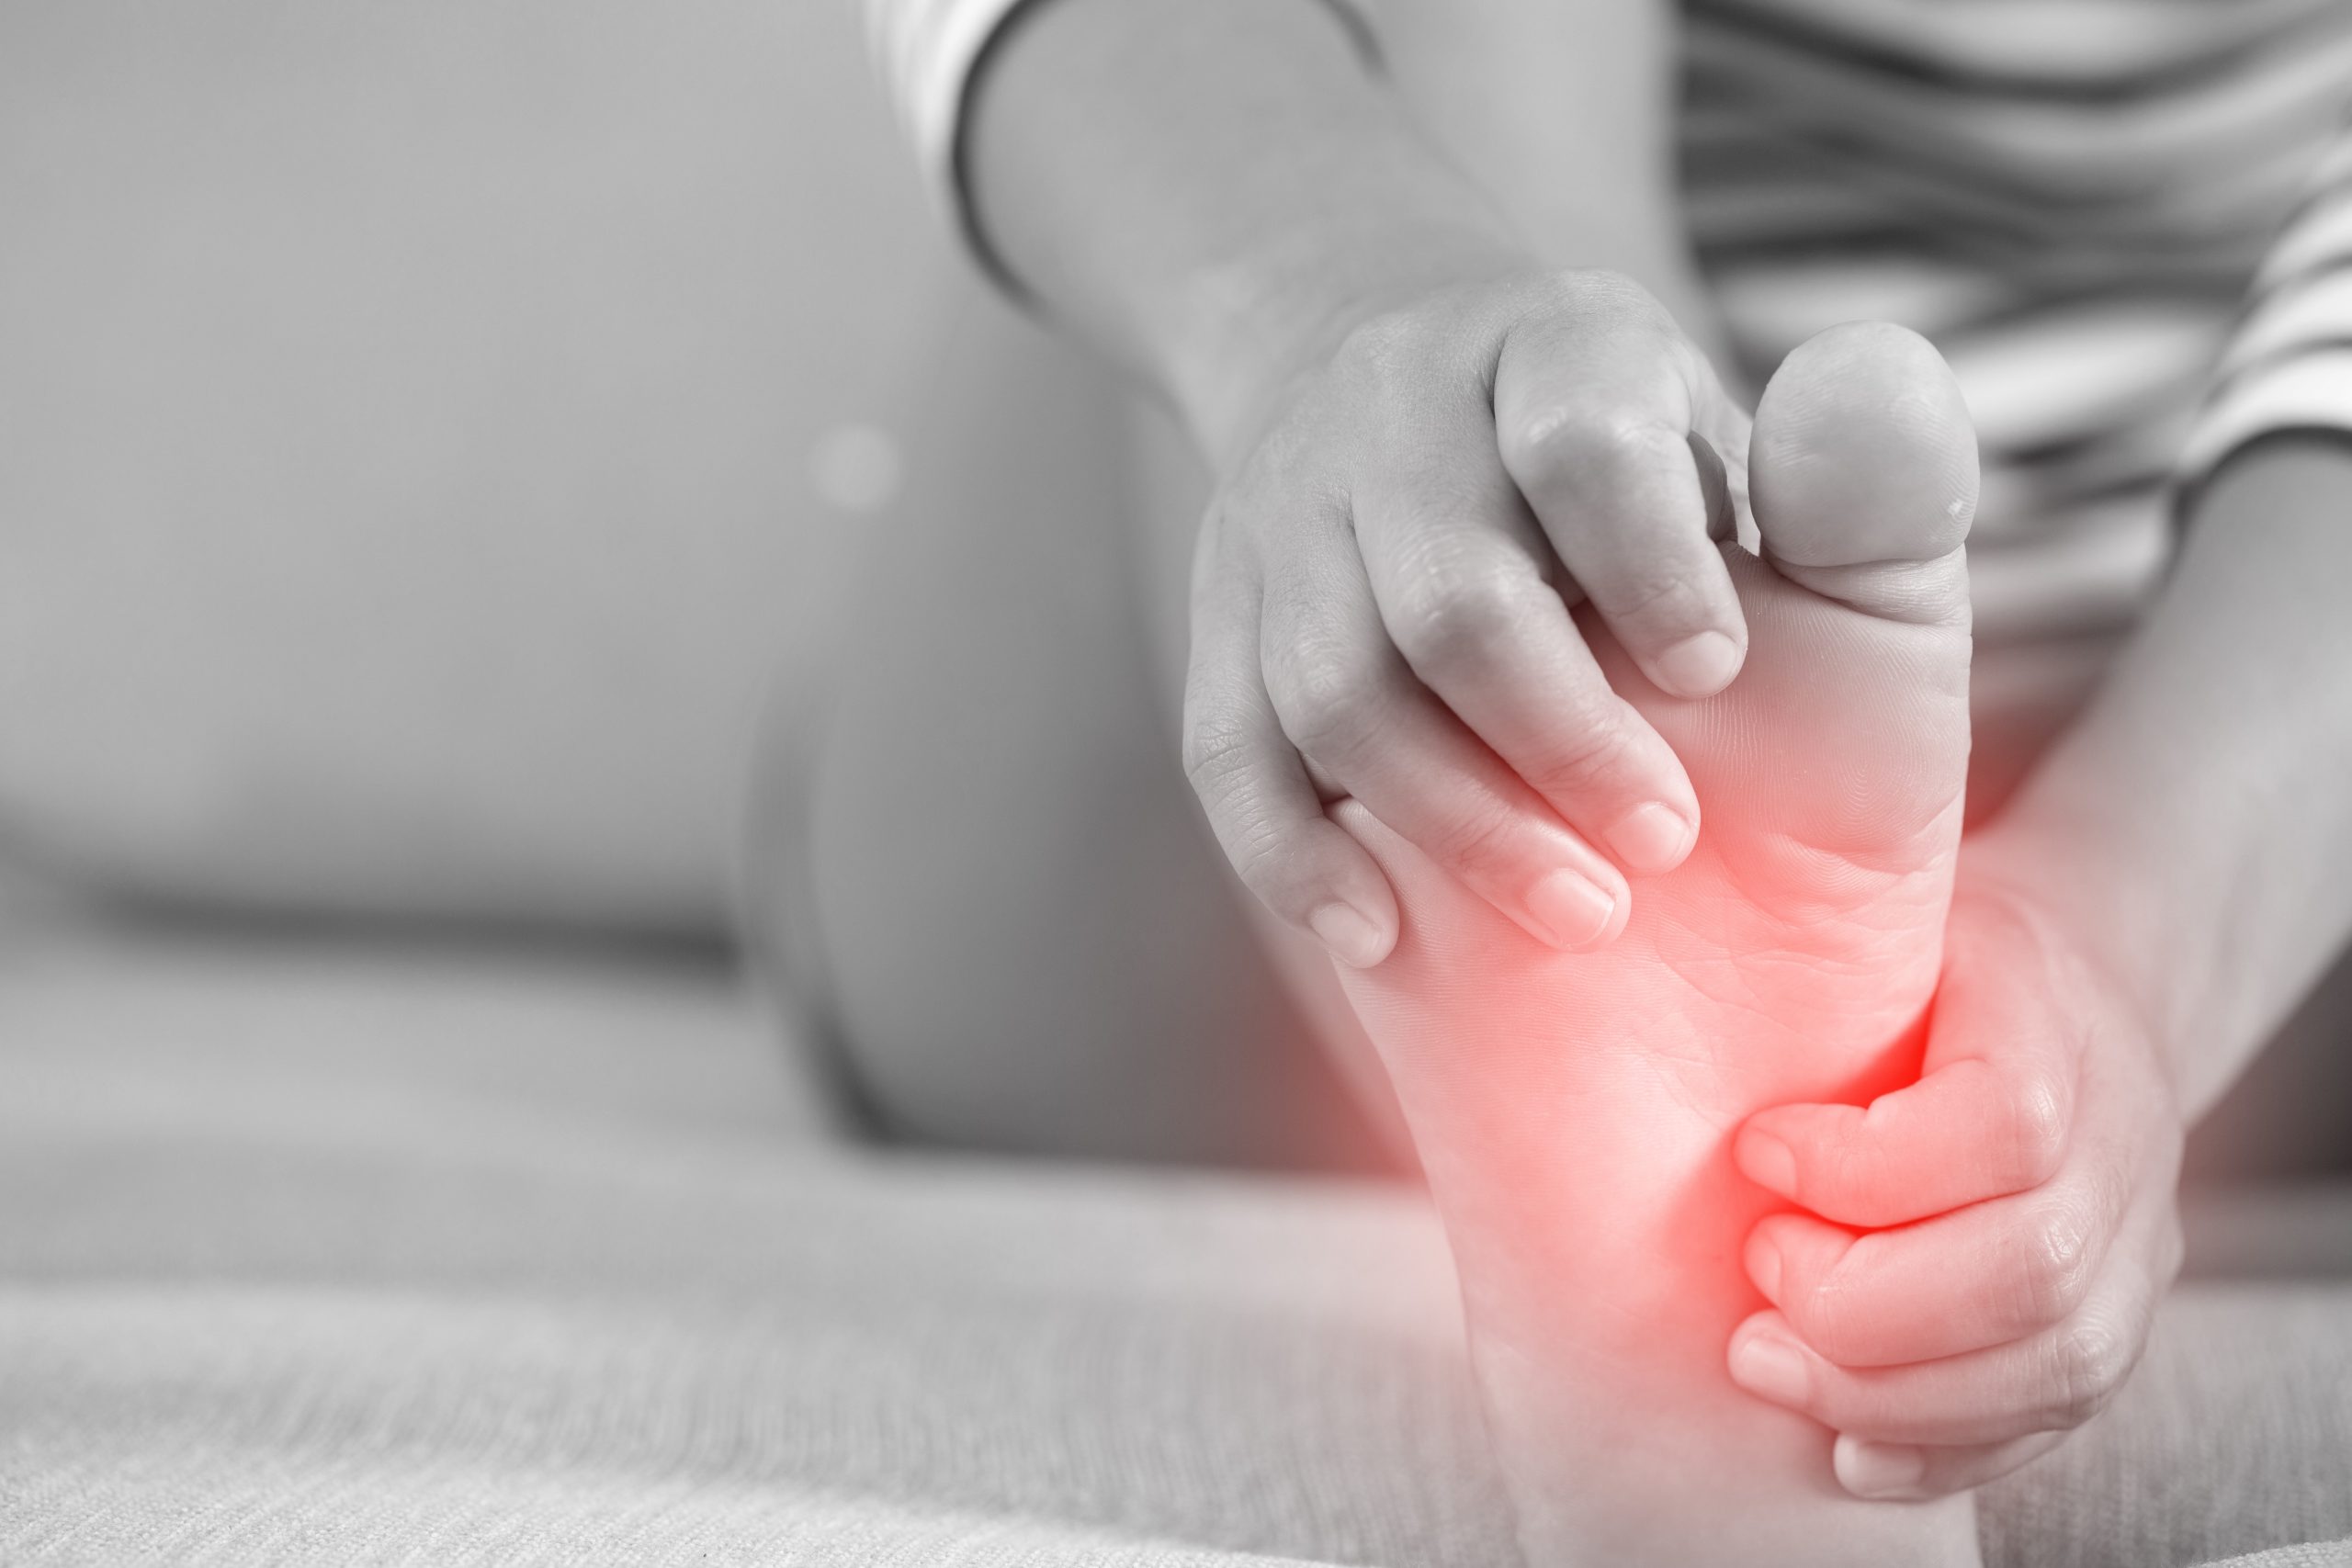 How to treat cramps under the foot